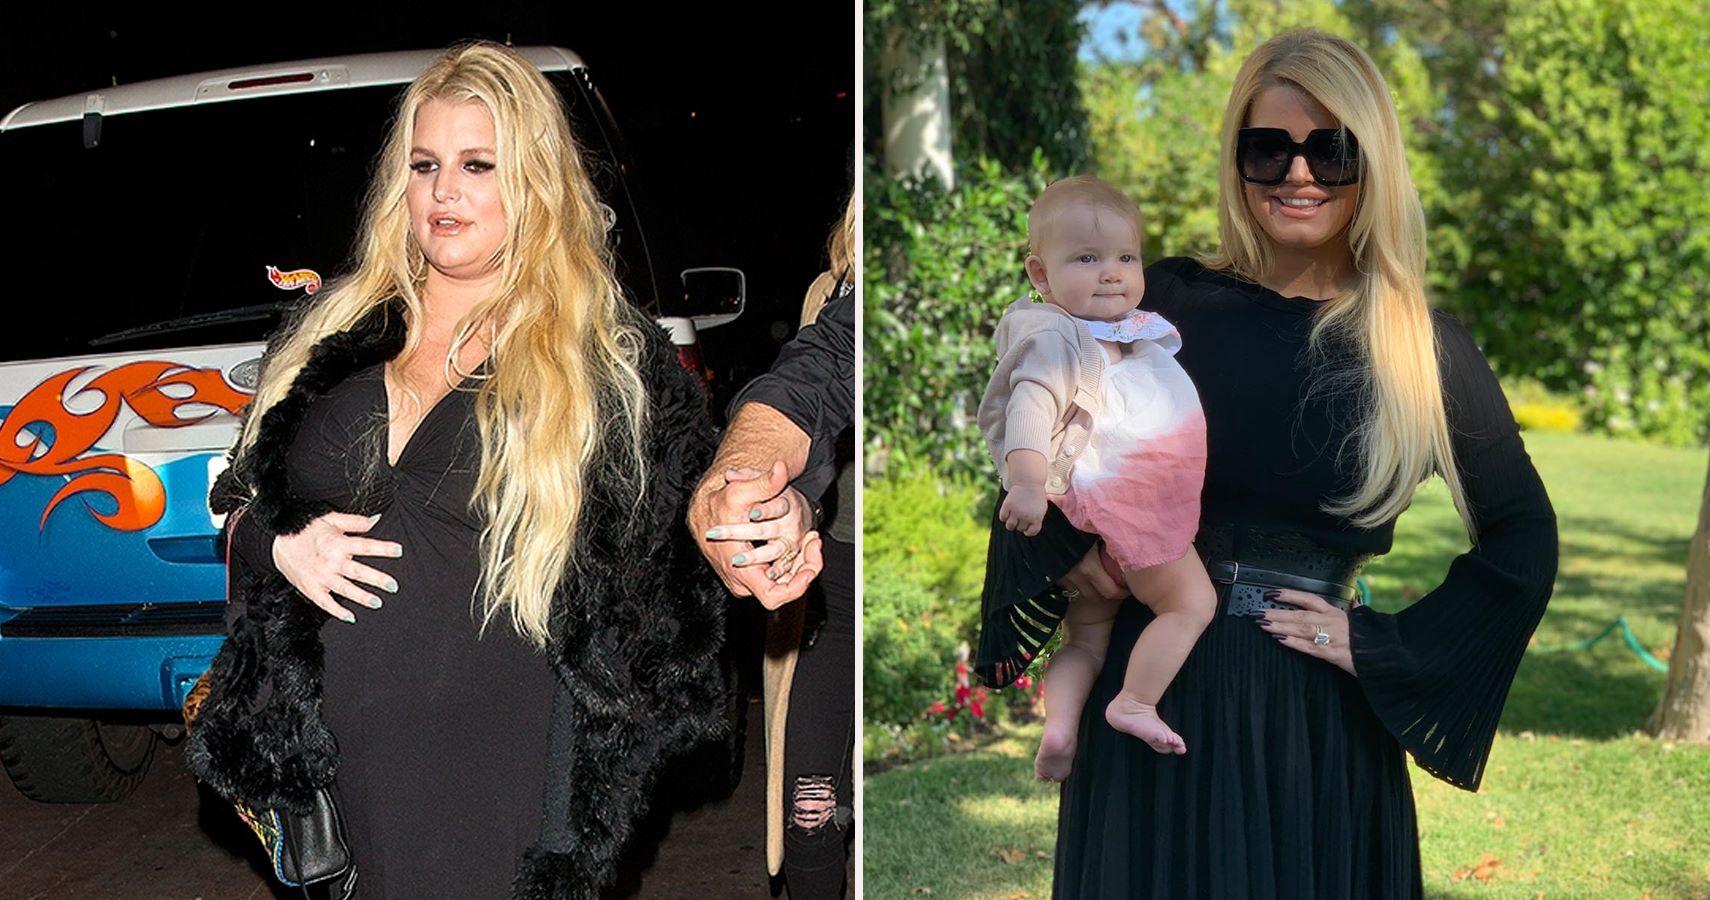 Jessica Simpson Drops A Whopping 100 Pounds... She Looks Stunning On Insta